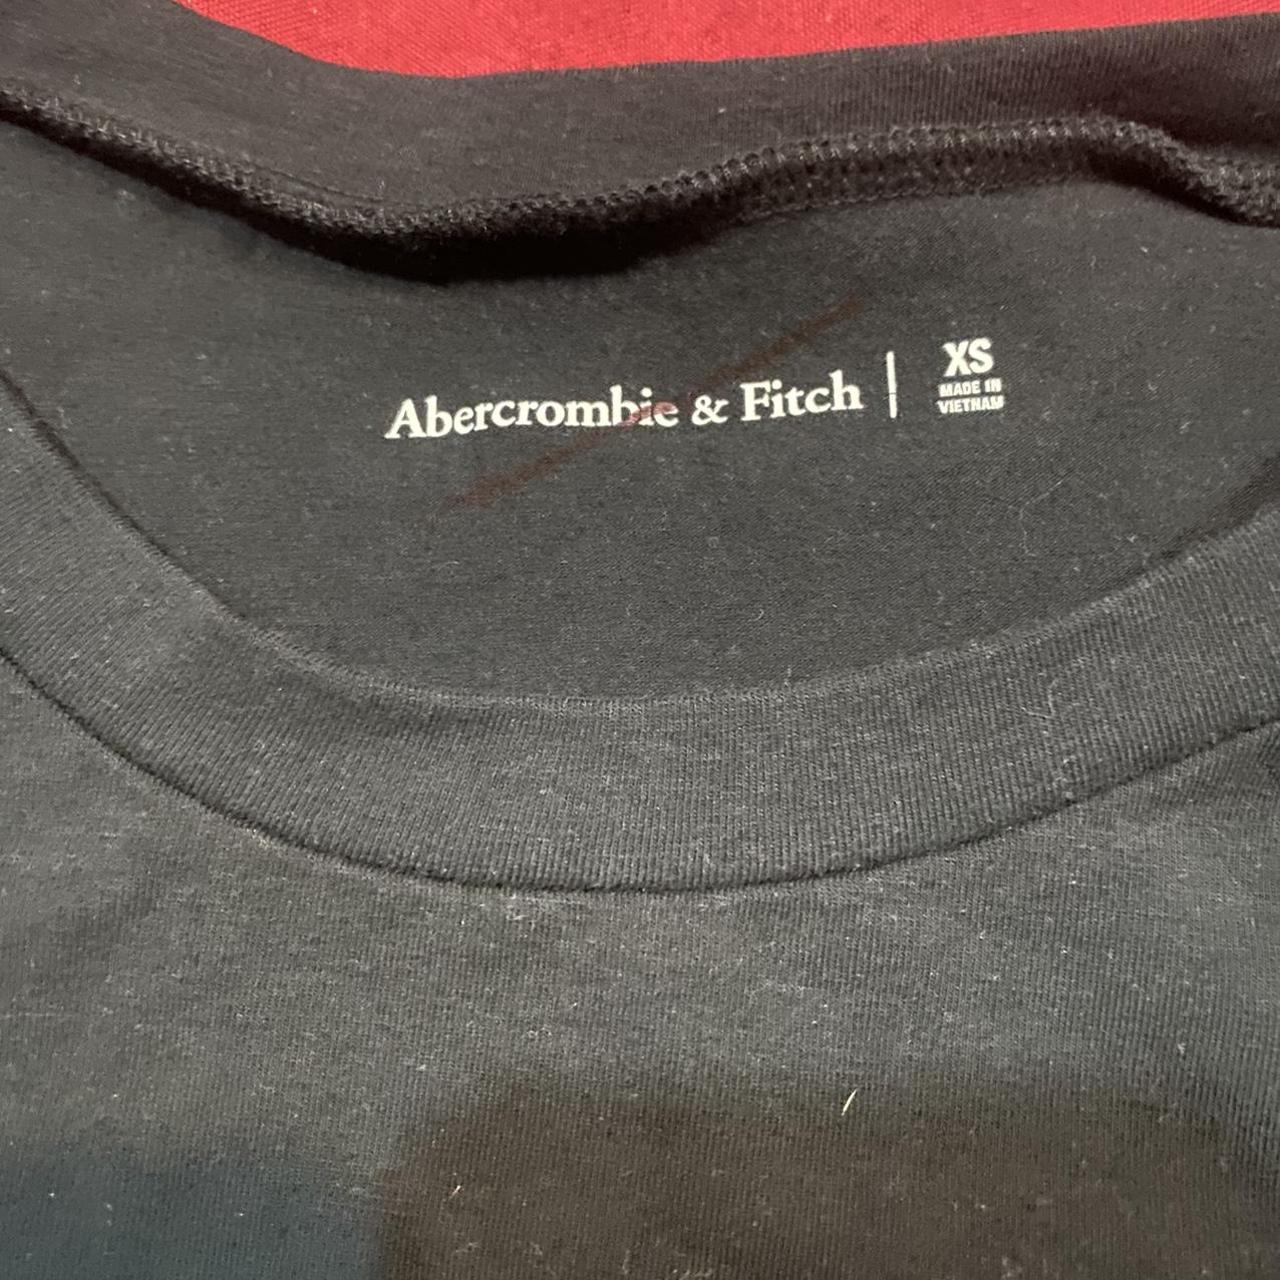 Abercrombie & Fitch Women's Black and White Shirt (4)